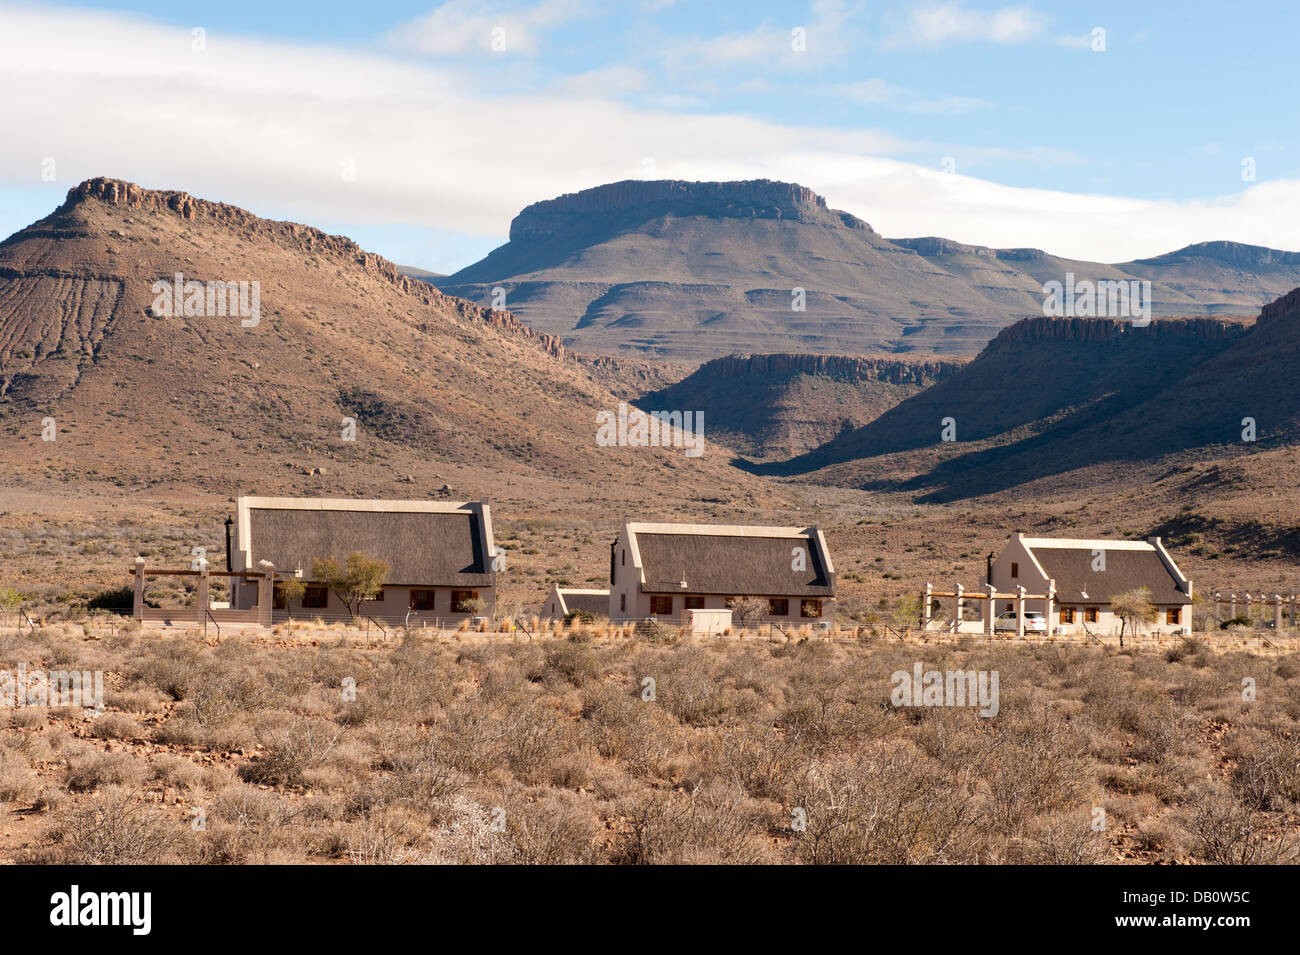 Chalets in Karroo National Park, Beaufort West, South Africa Stock Photo